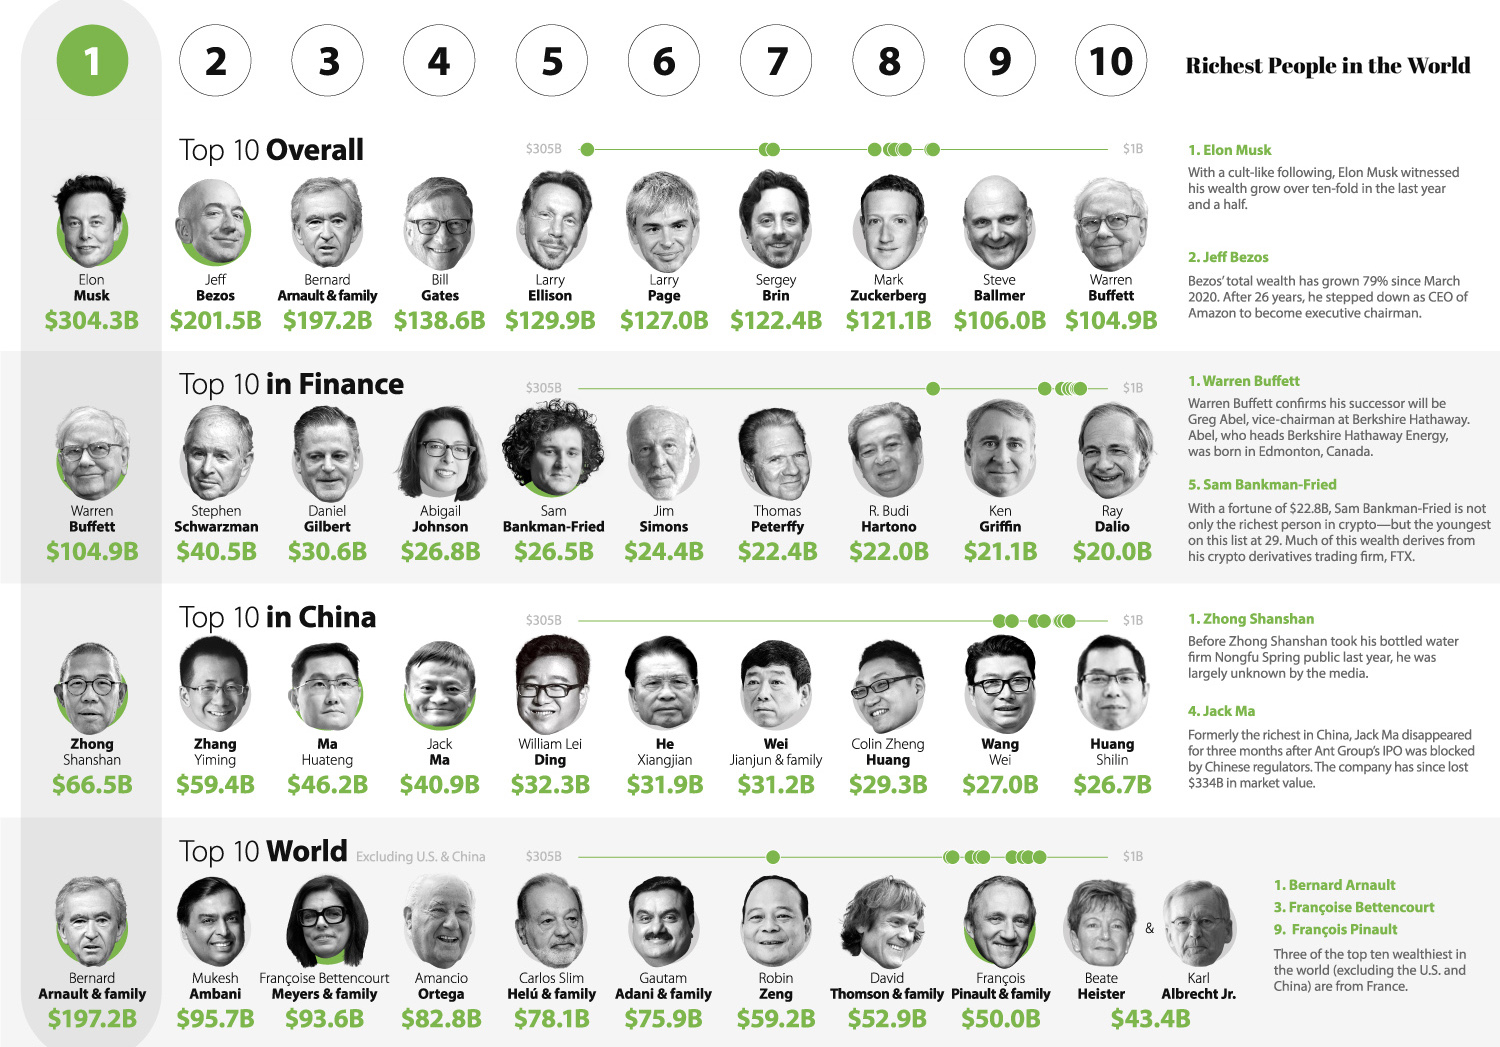 The Richest People in the World in 2021